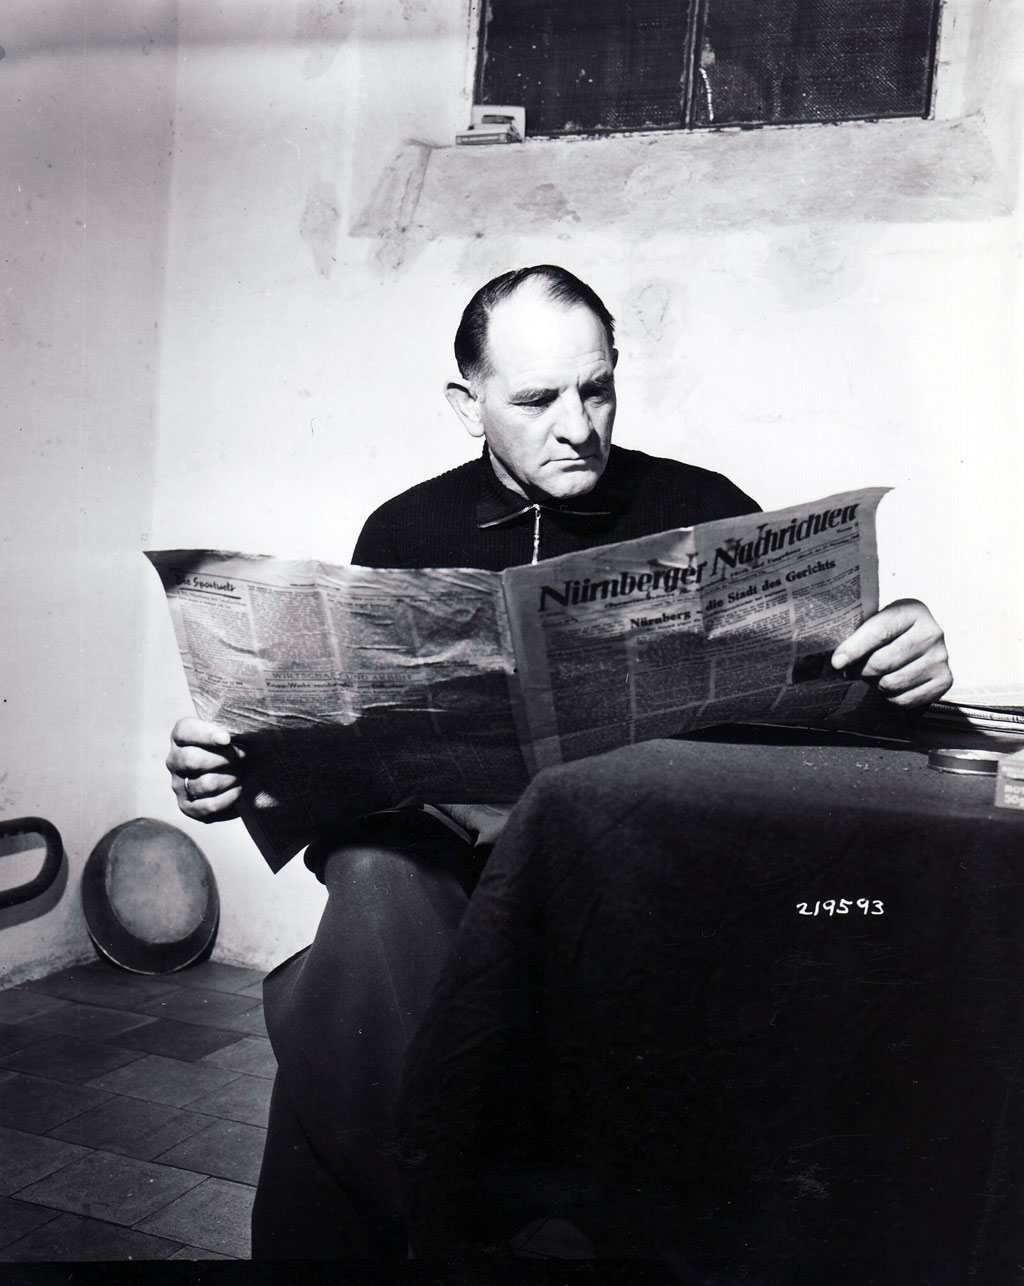 General Sepp Dietrich, the one-time butcher's apprentice and beer-hall brawler, commanded the Sixth Panzer Army. He is seen here in a Nuremberg jail cell, awaiting trial for war crimes in late 1945.